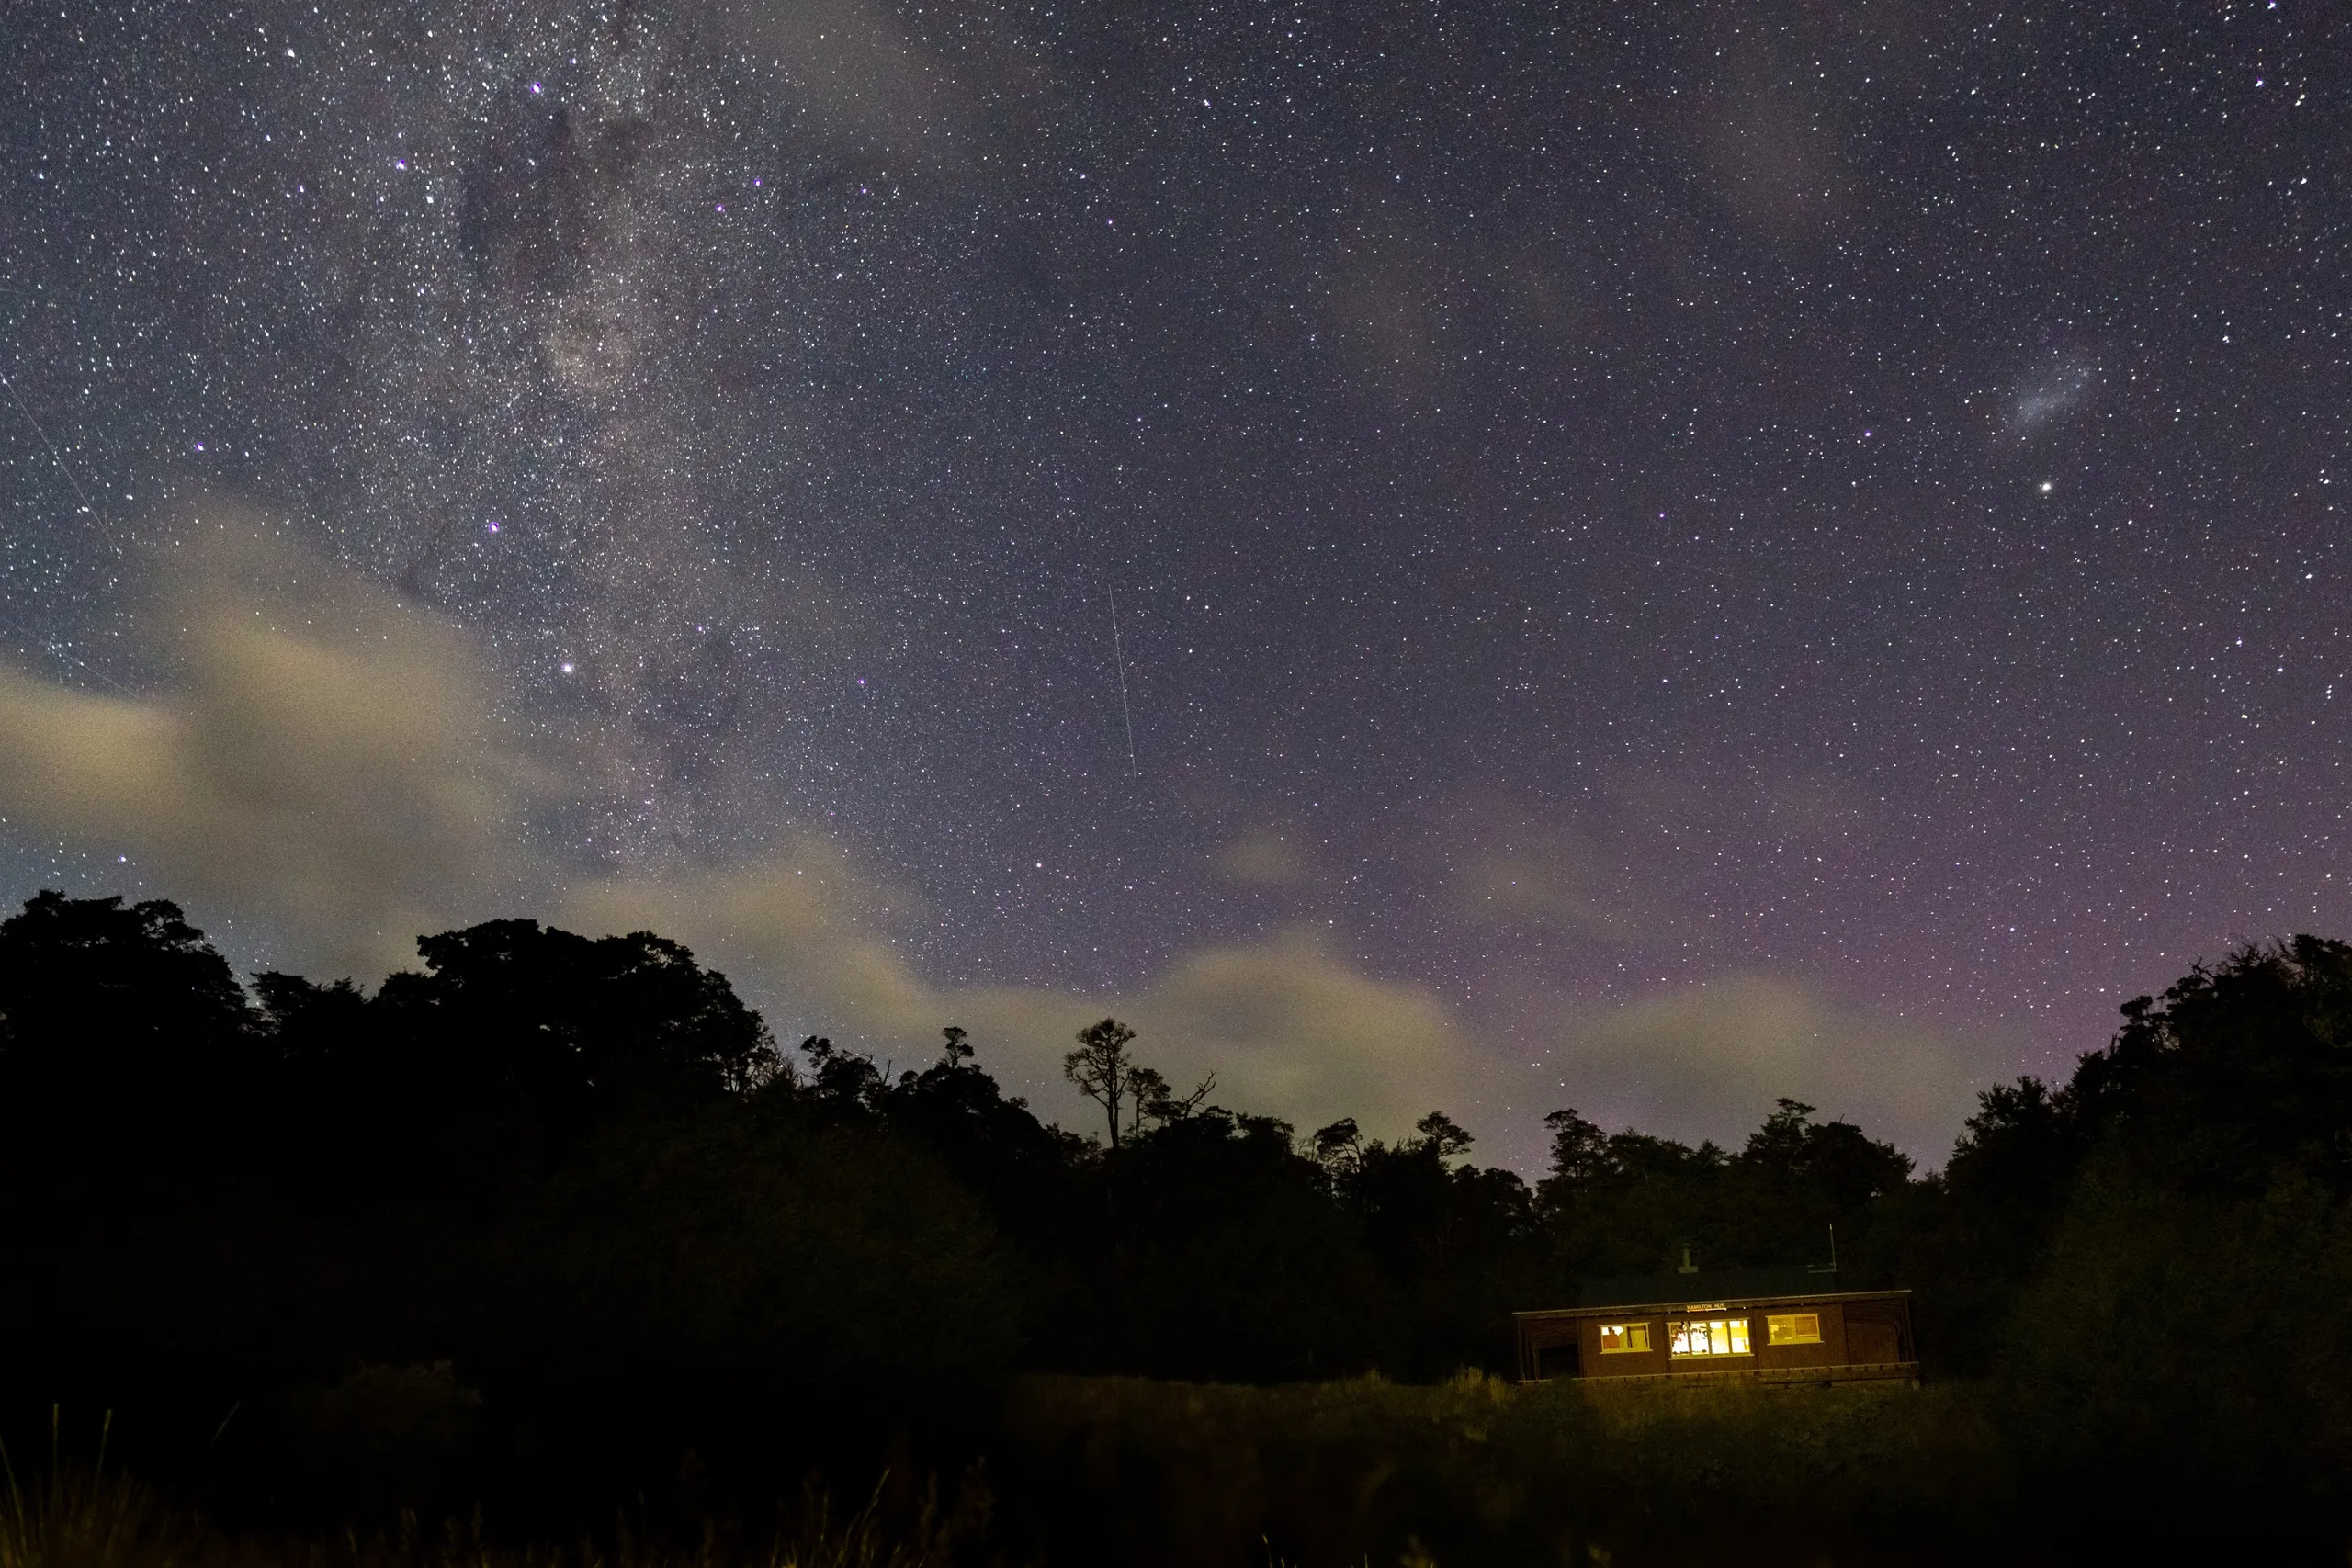 The night allowed for some good astrophotography before the cloud rolled in. Visible is Hamilton Hut and the bank upon which it sits.